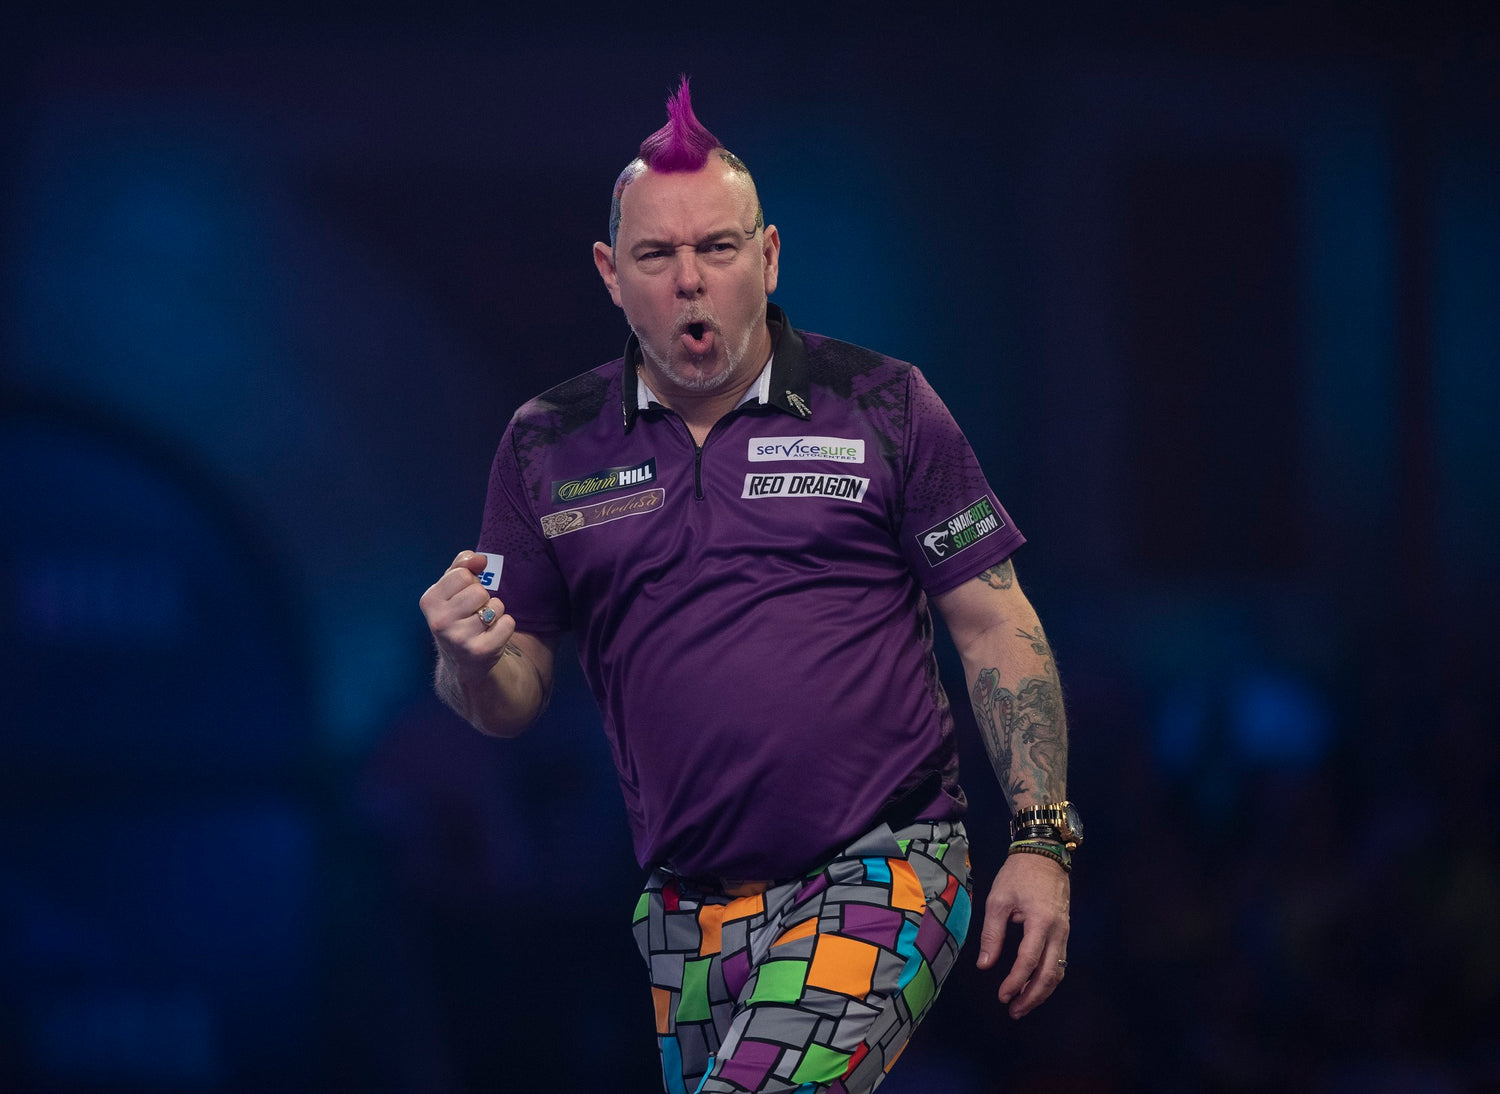 Wright targeting world number one spot before World Championship